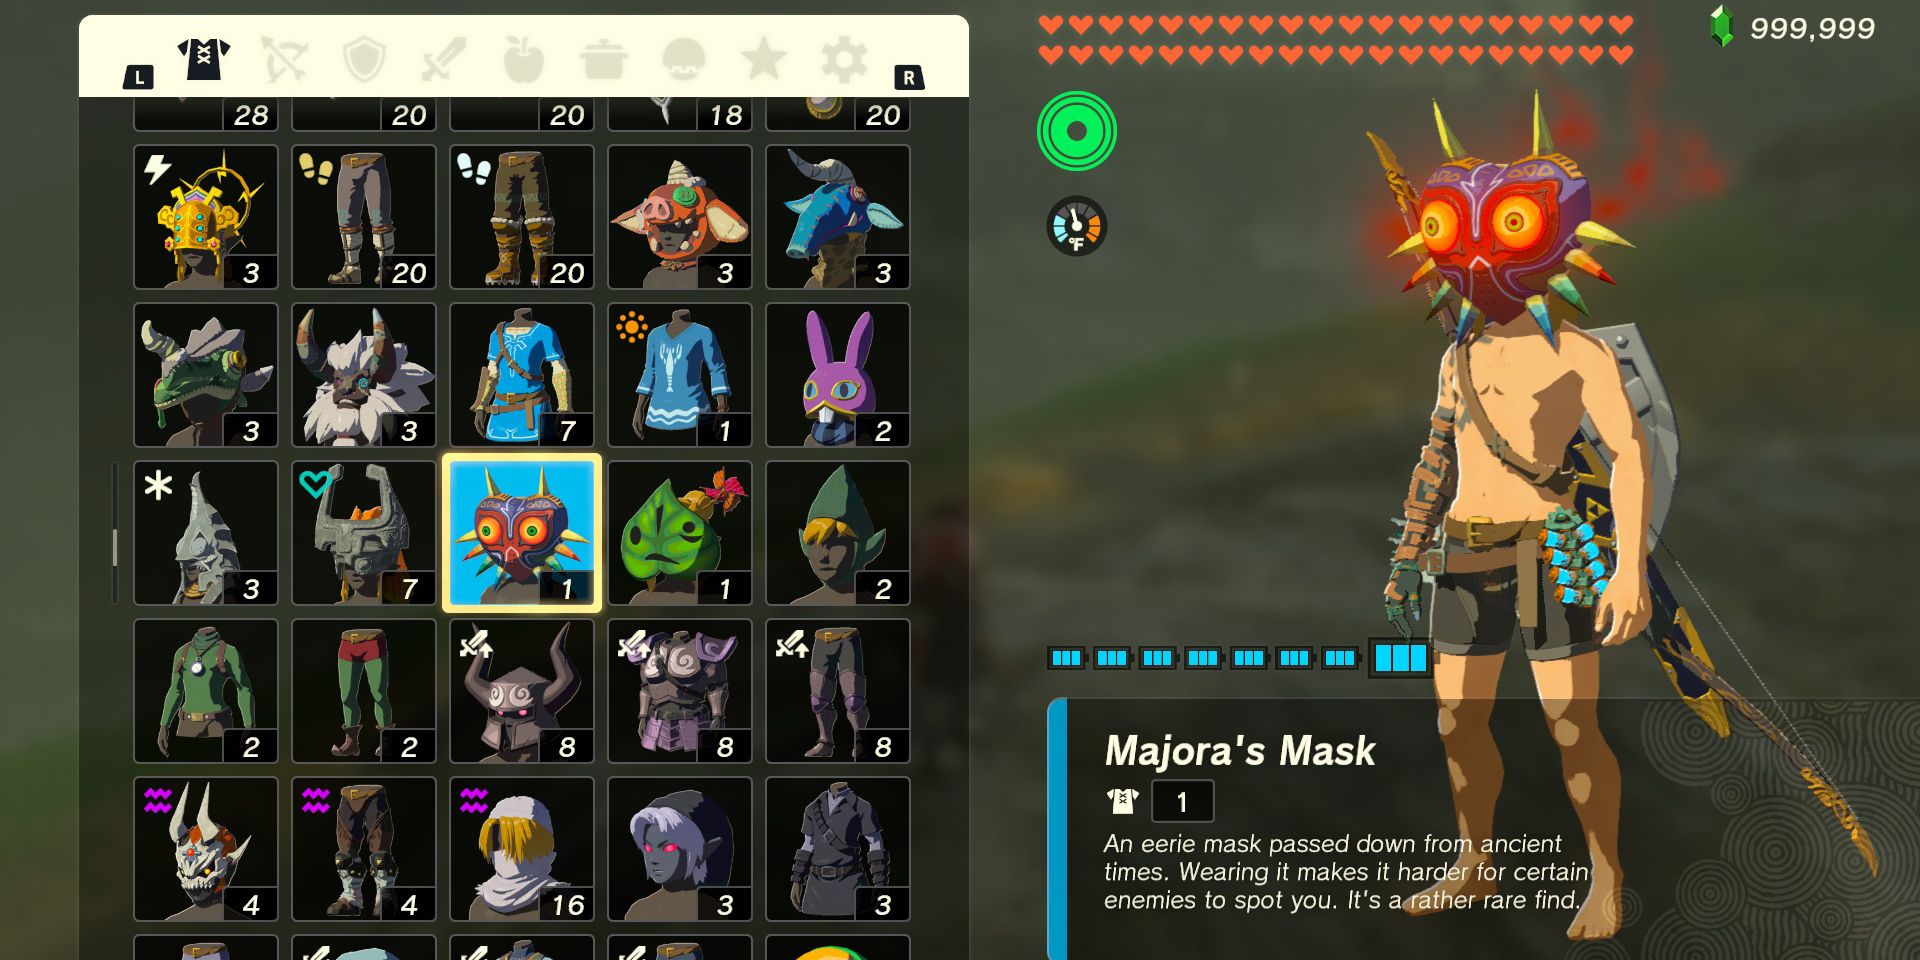 The Majora's Mask armor piece in The Legend of Zelda: Tears of the Kingdom